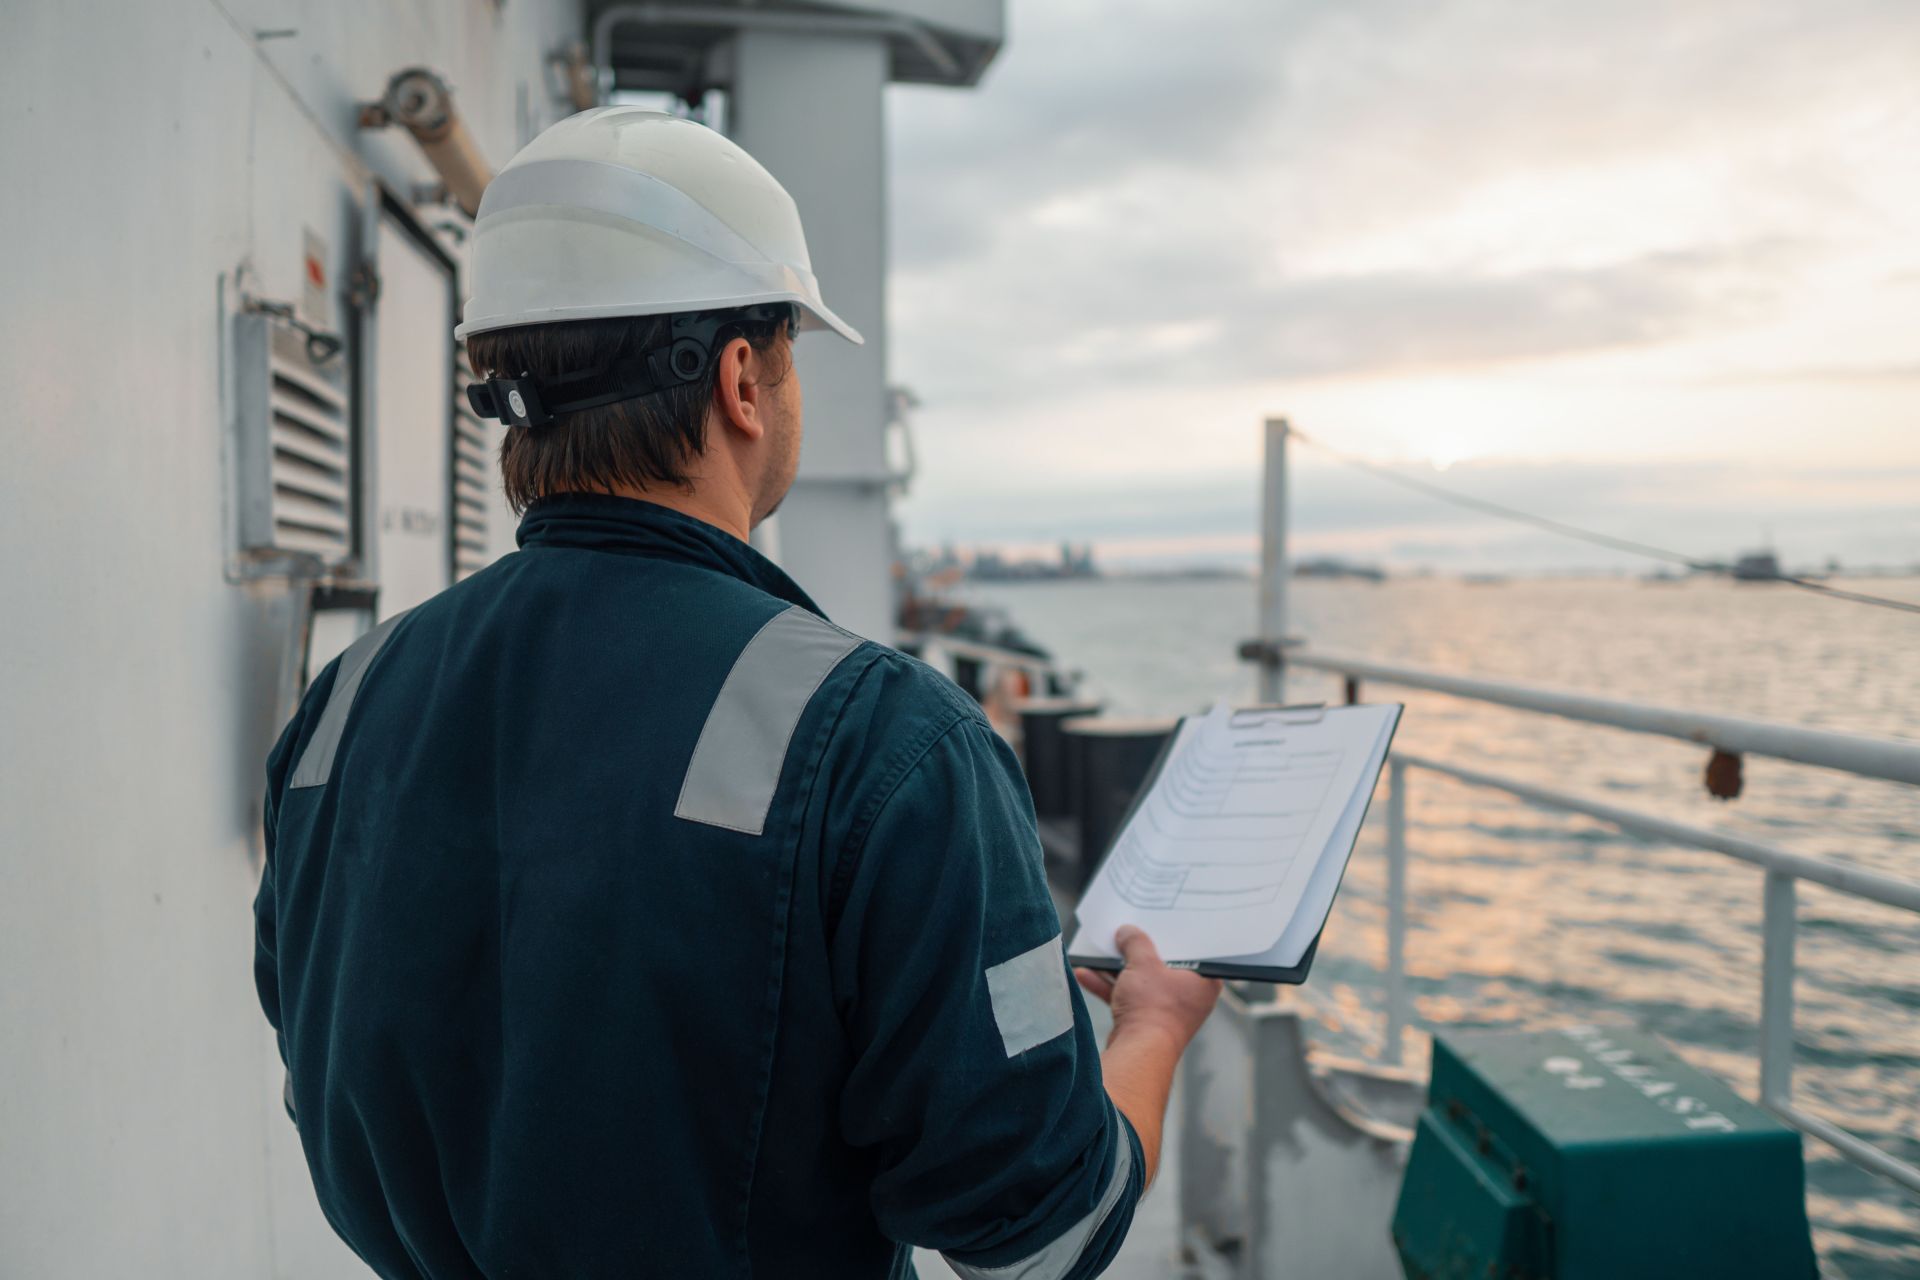 "Maritime safety officer conducting routine inspection on ship's deck at dawn, clipboard in hand, overseeing harbor operations.